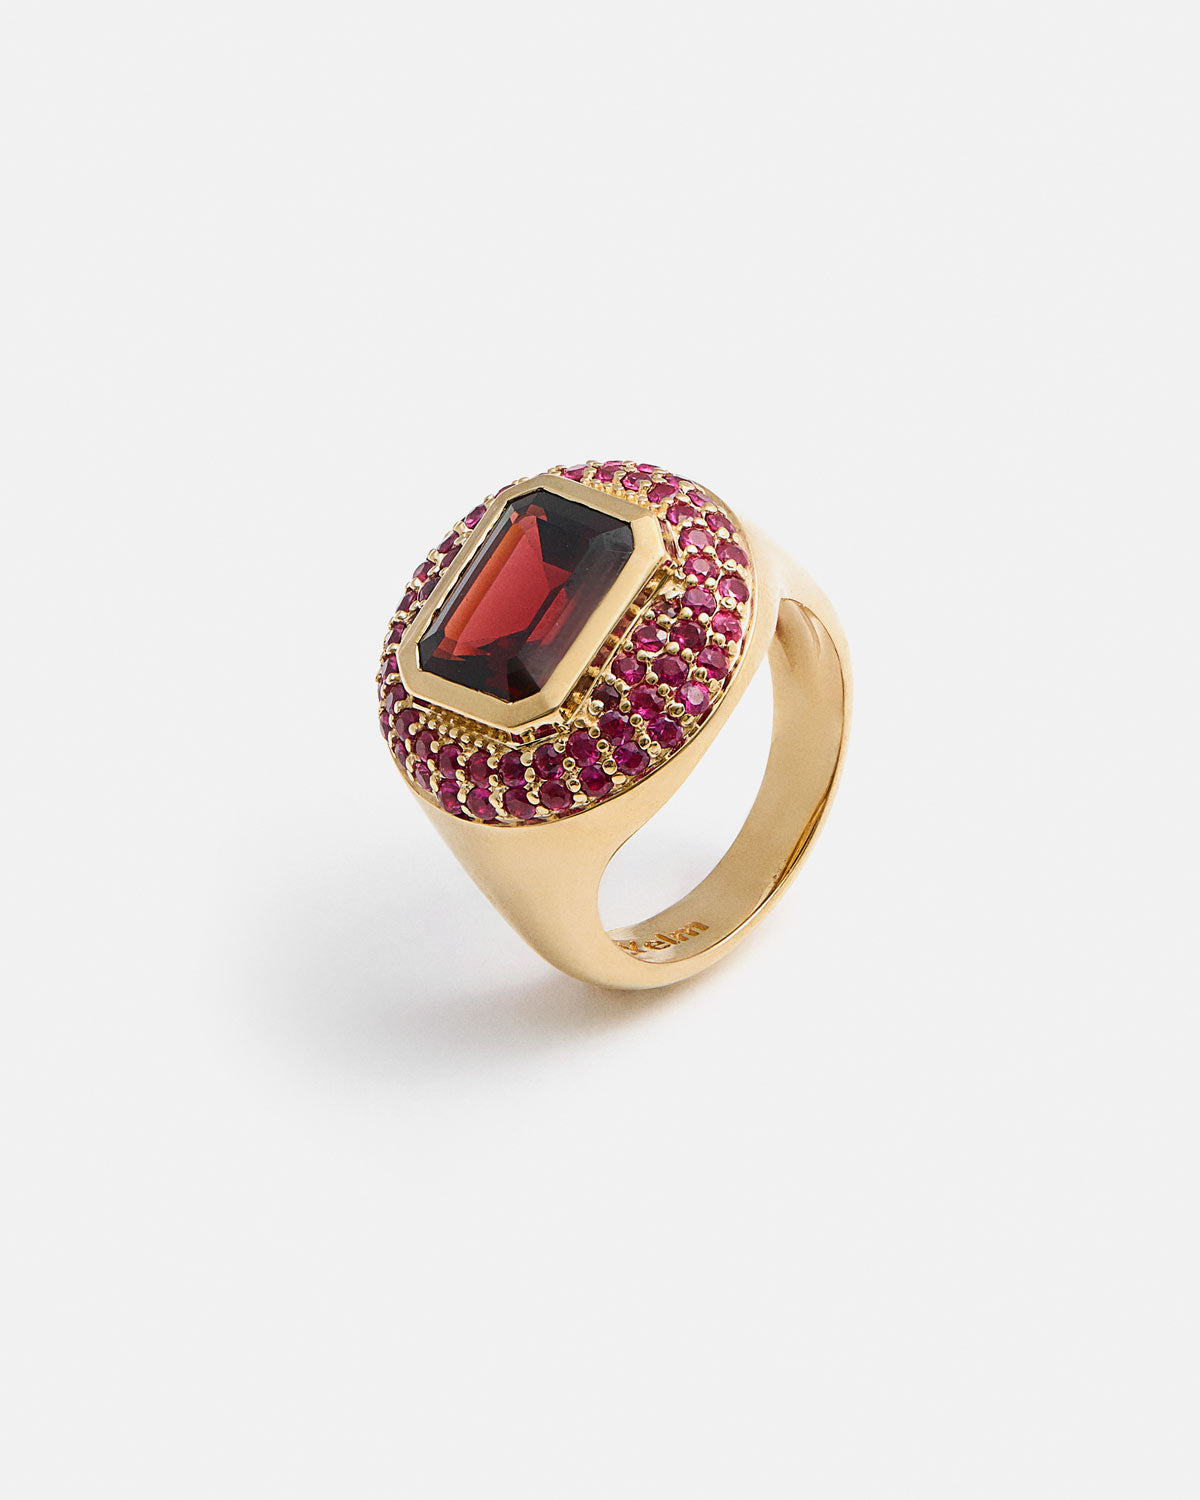 Mona Ring in 14k Yellow Gold with Garnet and Rubies